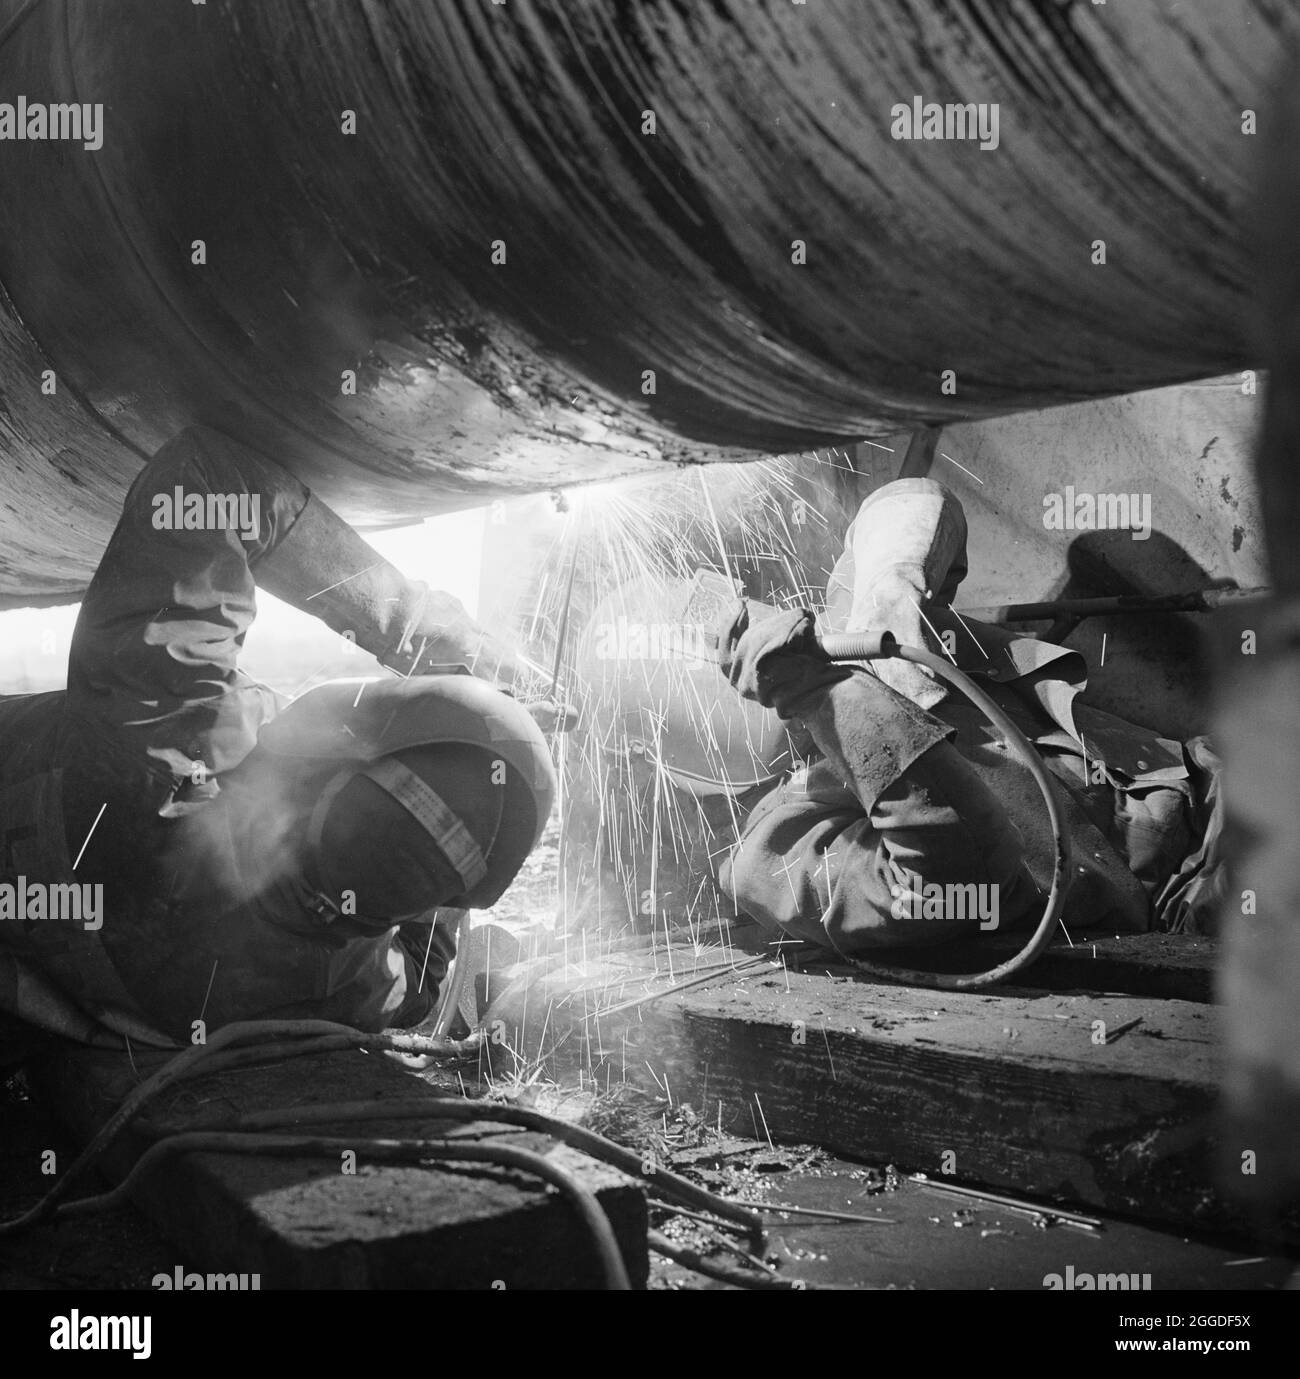 Two welders at work on the Rugby gas pipeline. This pipeline was part of a pipeline carrying North Sea natural gas from the Norfolk coast to the Rugby area where it was connected with an existing natural gas pipeline supplying eight of Britain's area gas boards. The work was carried out by Laing Civil Engineering along with French companies Entrepose and Grands Travaux de Marseille (GTM). Stock Photo